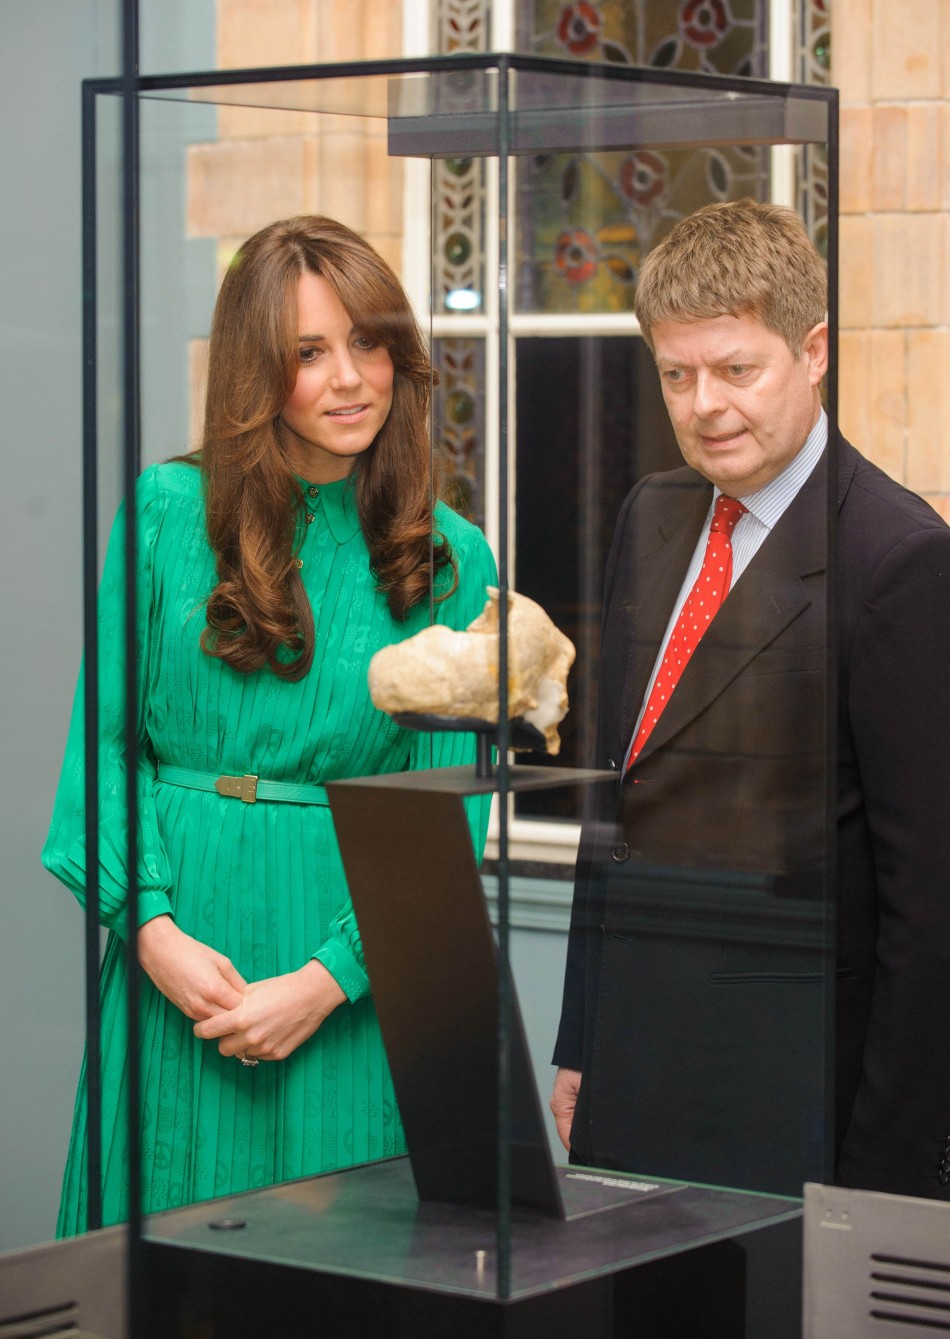 Duchess of Cambridge and the Director of the Natural History Museum Michael Dixon view an exhibit at the Natural History Museum, in central London